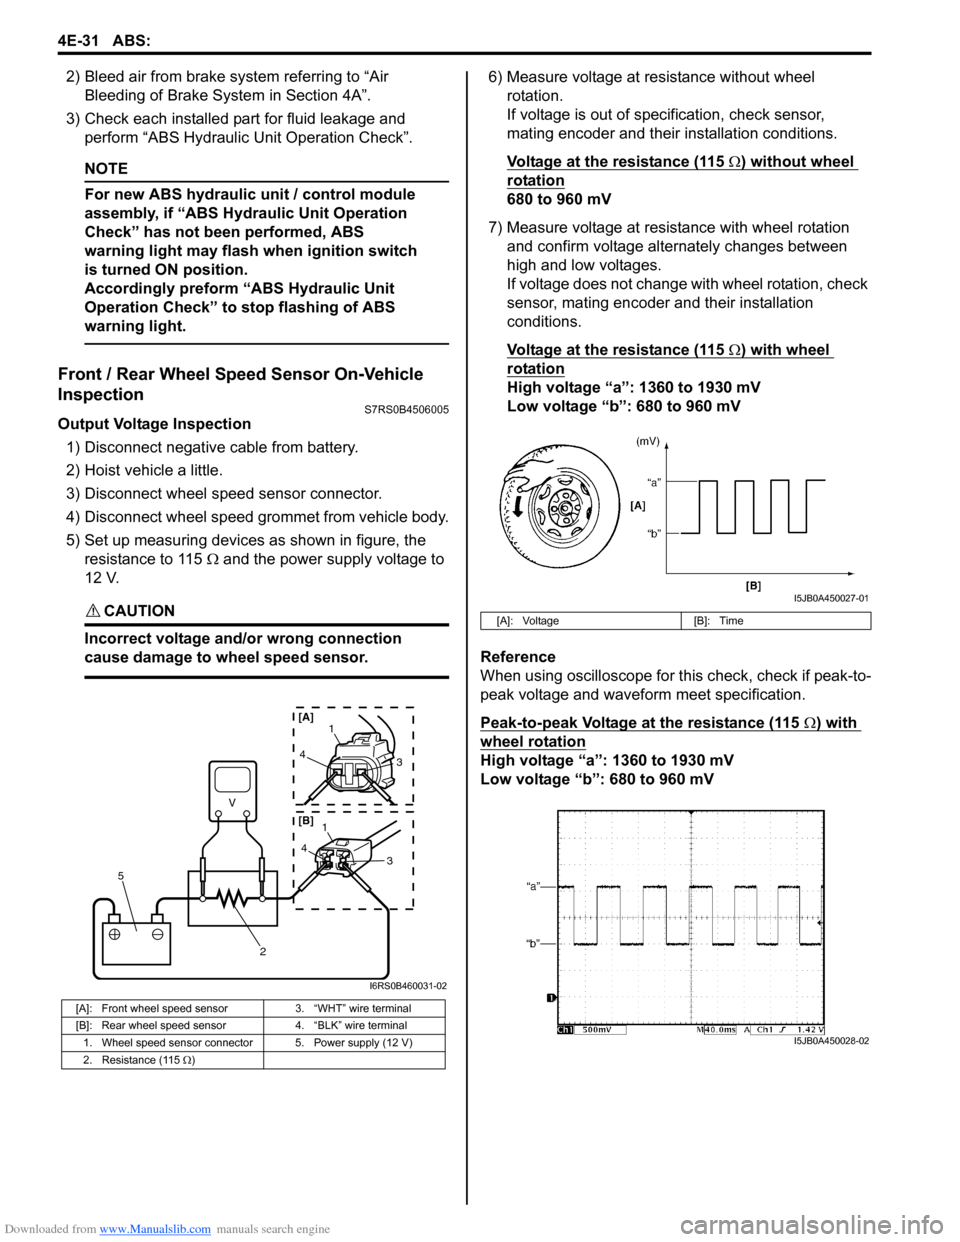 SUZUKI SWIFT 2007 2.G Service Service Manual Downloaded from www.Manualslib.com manuals search engine 4E-31 ABS: 
2) Bleed air from brake system referring to “Air Bleeding of Brake System in Section 4A”.
3) Check each installed part for flui